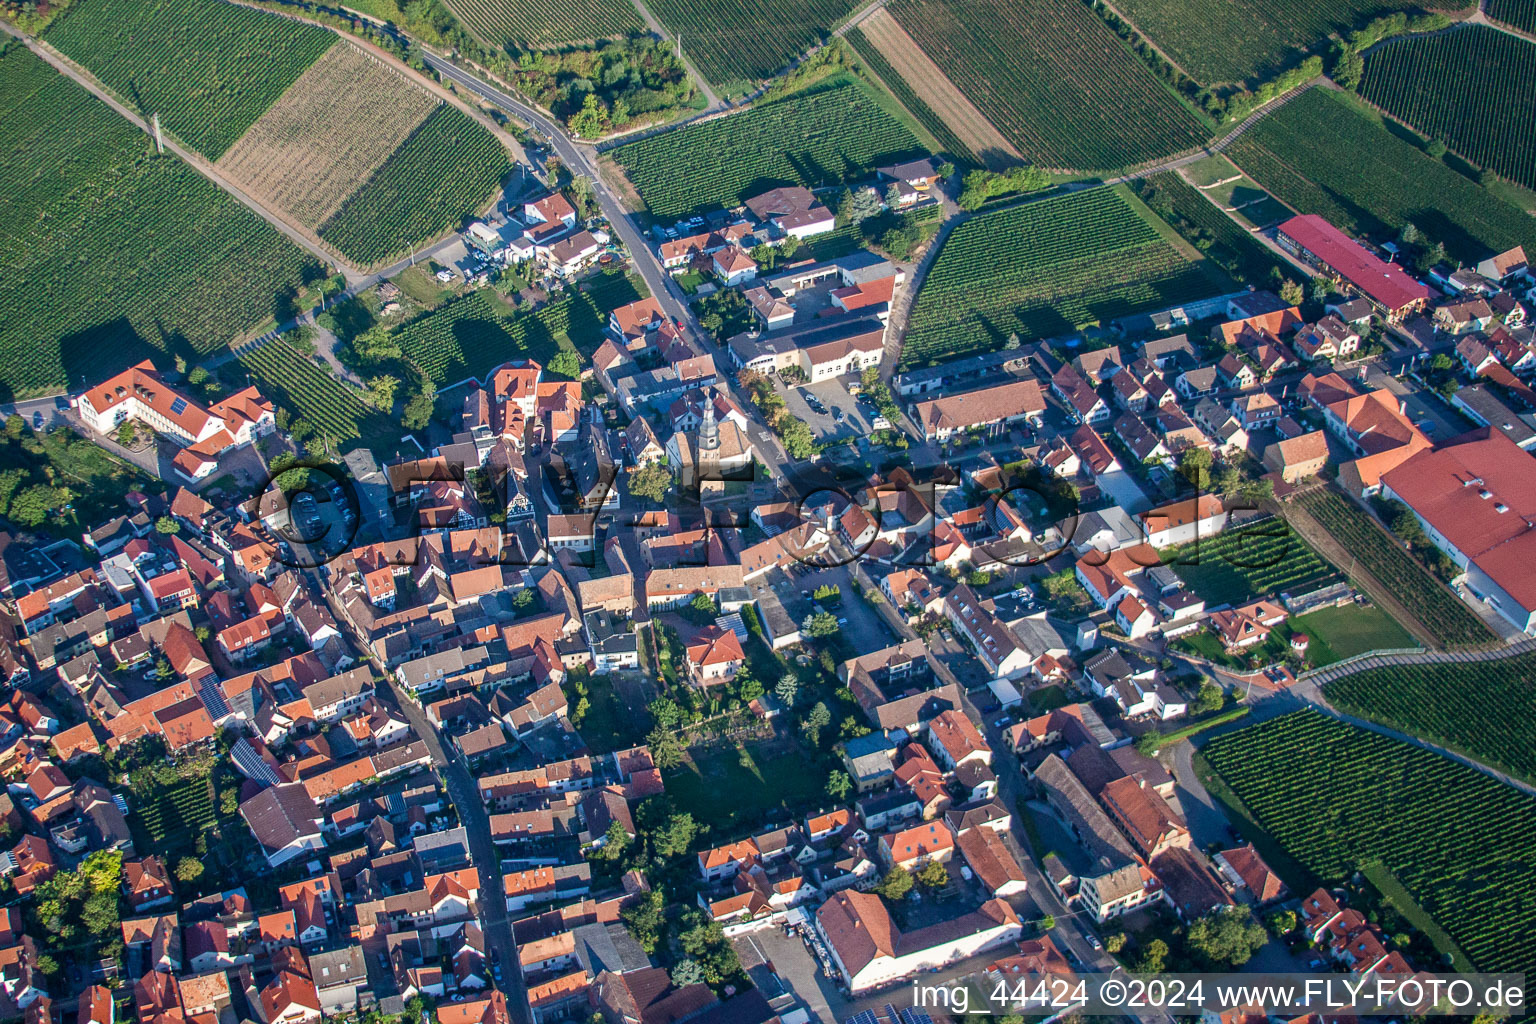 Aerial view of Village - view on the edge of agricultural fields and farmland in Kallstadt in the state Rhineland-Palatinate, Germany